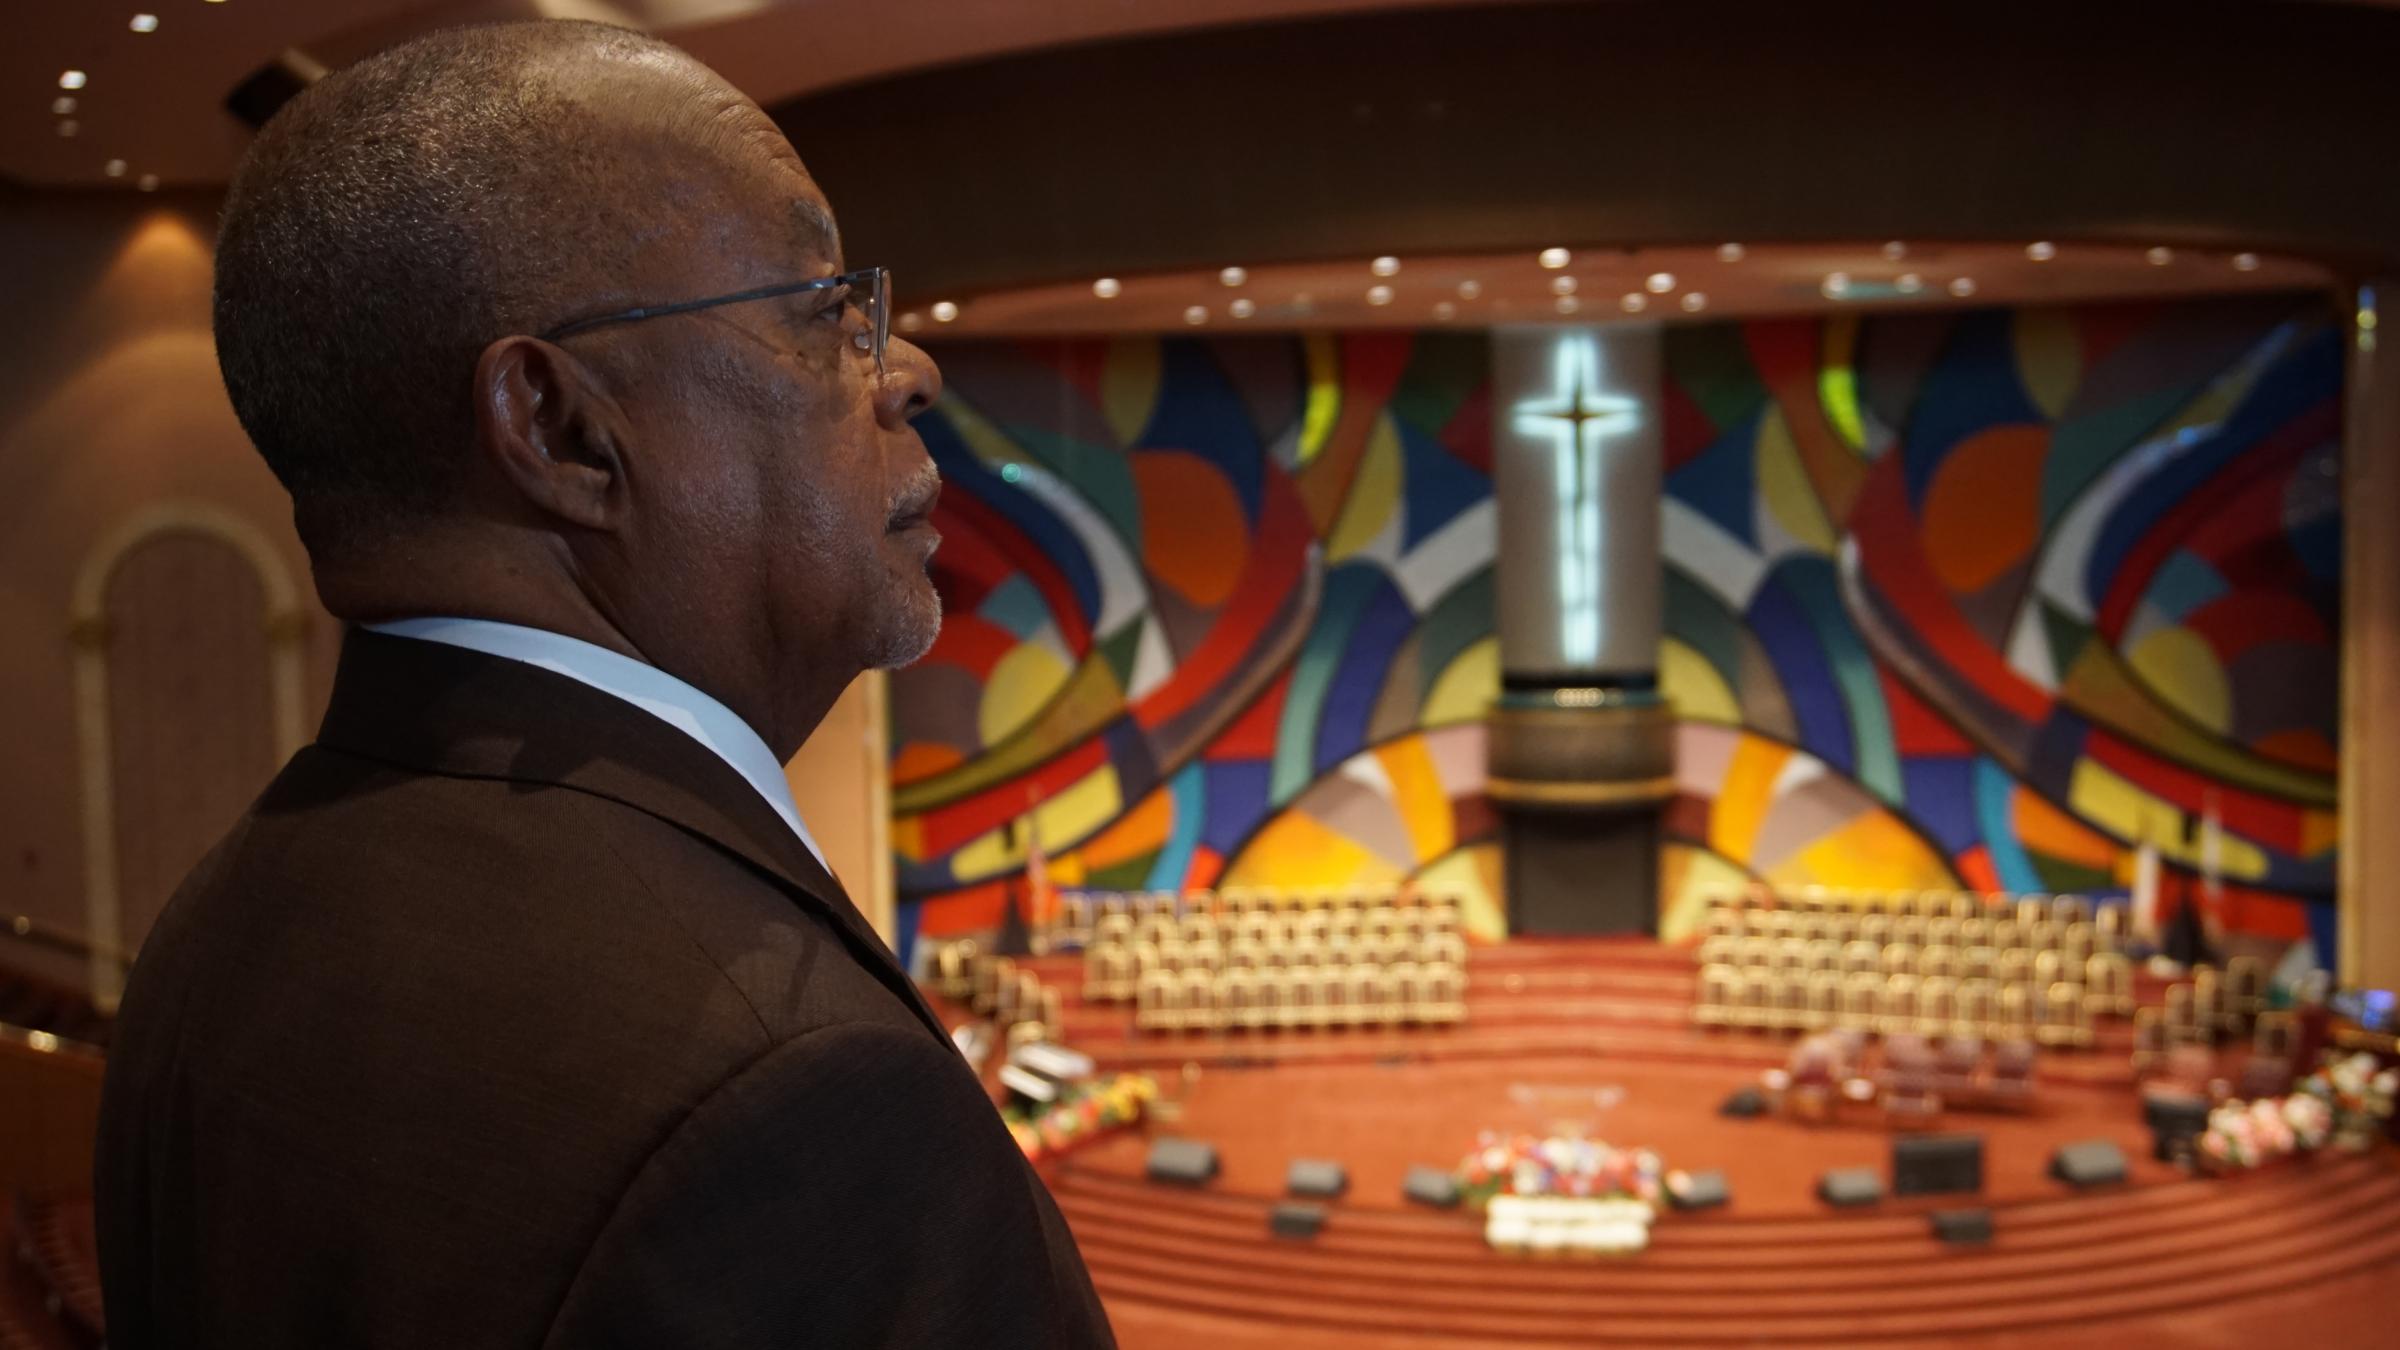 "The Black Church: This is Our Story, This is Our Song" premieres February 16 and 23, 2021 at 9/8c on PBS (check local listings) Caption: Host, Henry Louis Gates Jr., admires the mural at Church of God In Christ West AngelesCredit: Courtesy of McGee MediaFor editorial use only in conjunction with the direct publicity or promotion of this program for a period of three years from the program's original broadcast date, unless otherwise noted. No other rights are granted. All rights reserved.